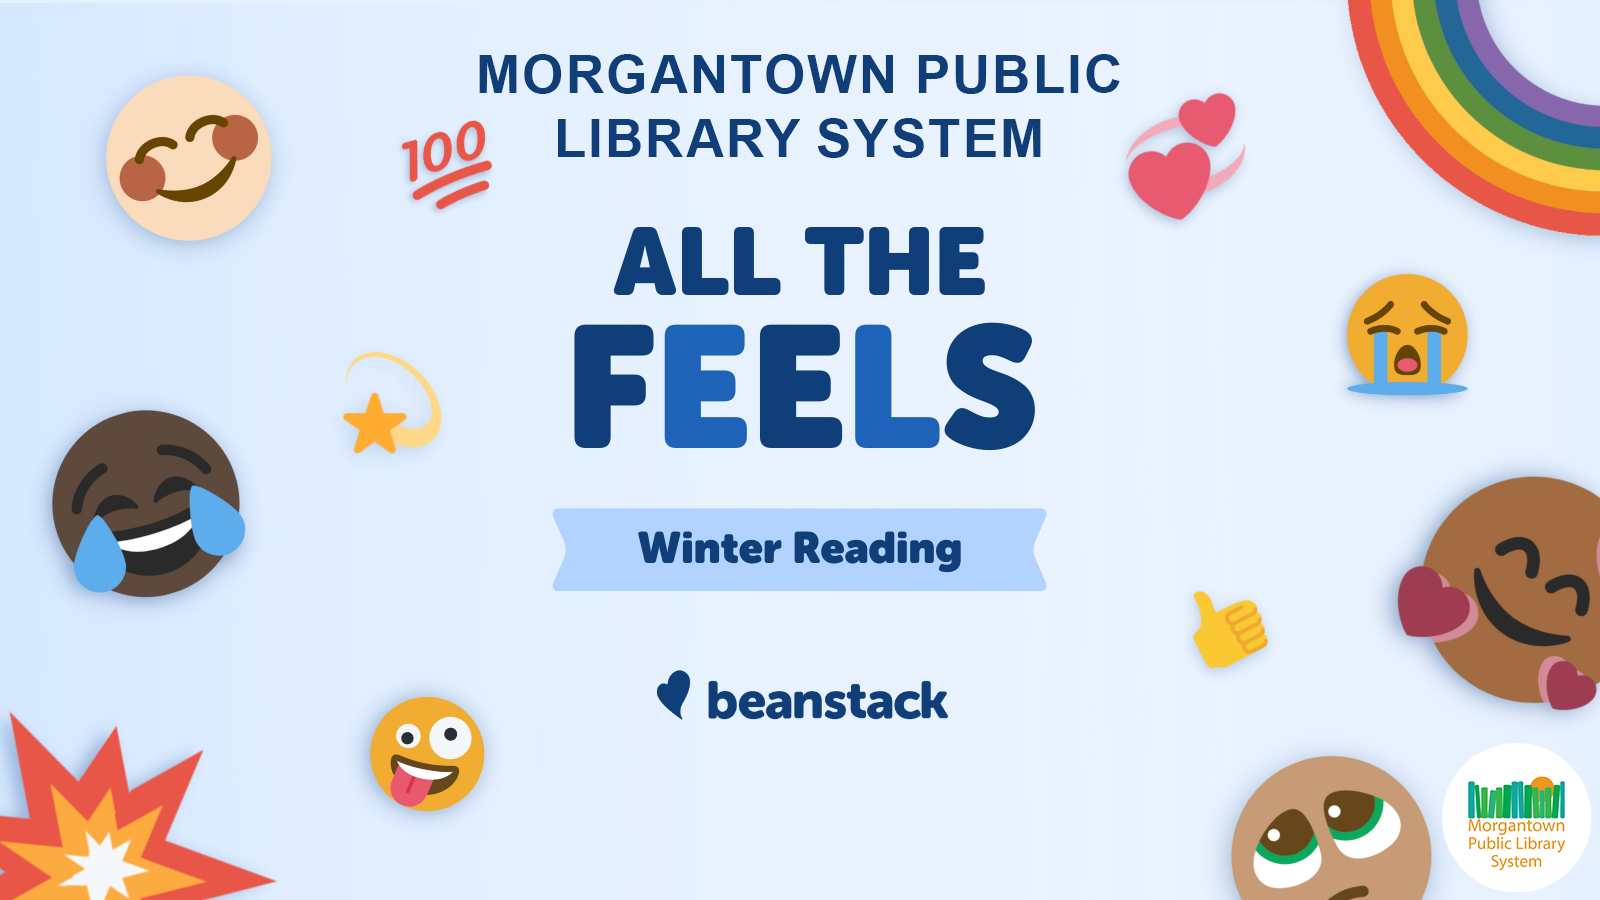 All the Feels Winter Reading flyer with emojis.